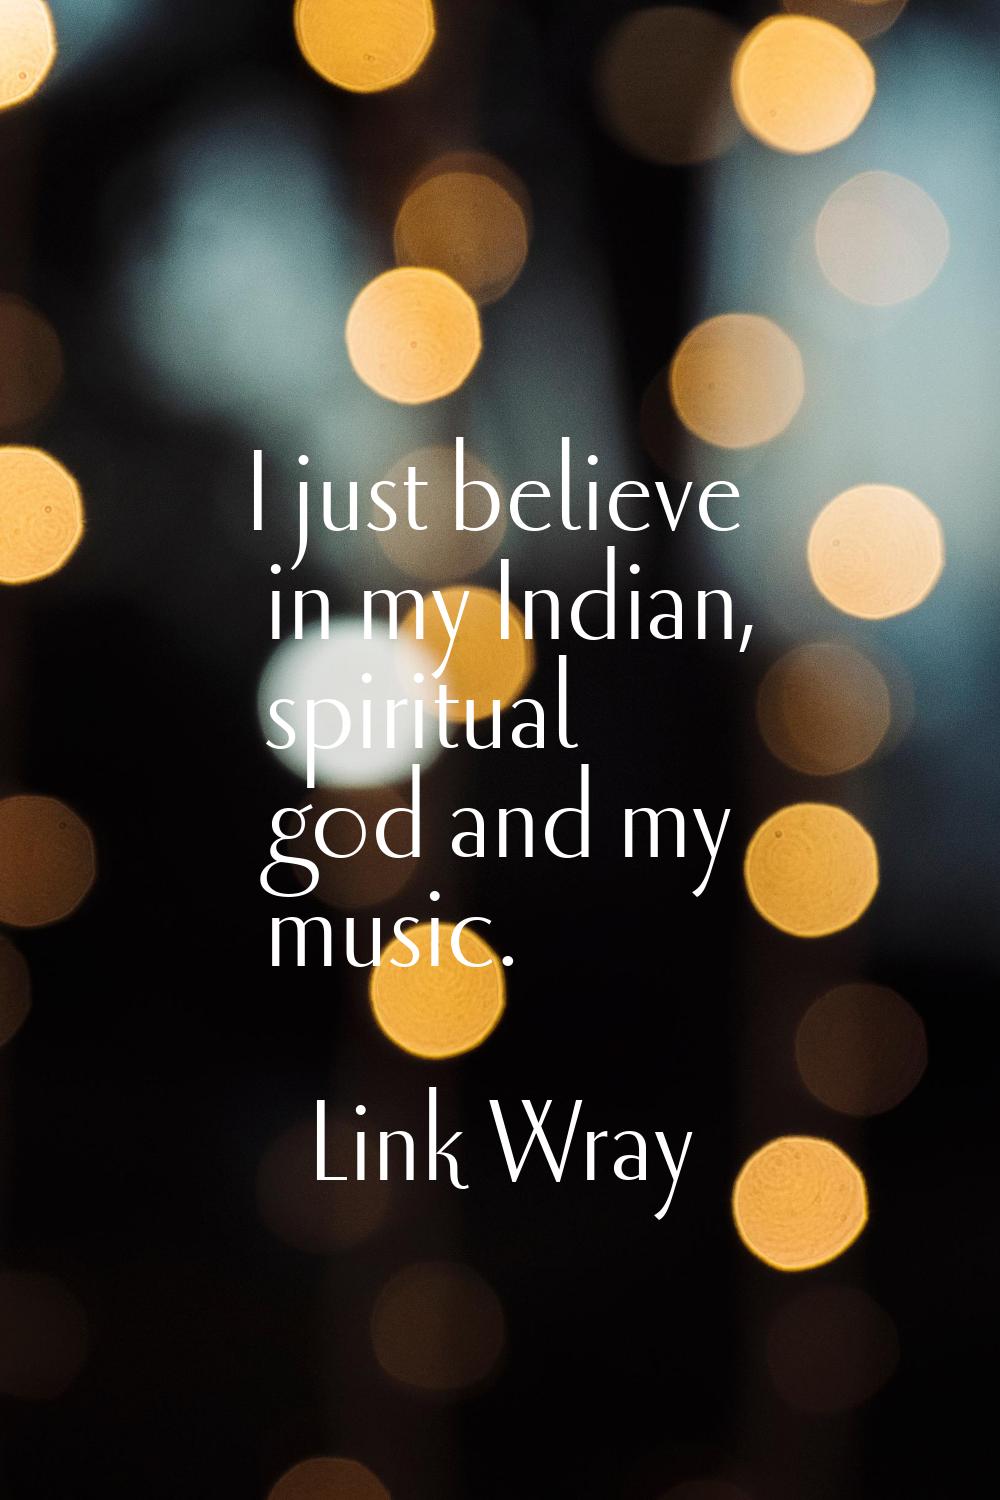 I just believe in my Indian, spiritual god and my music.